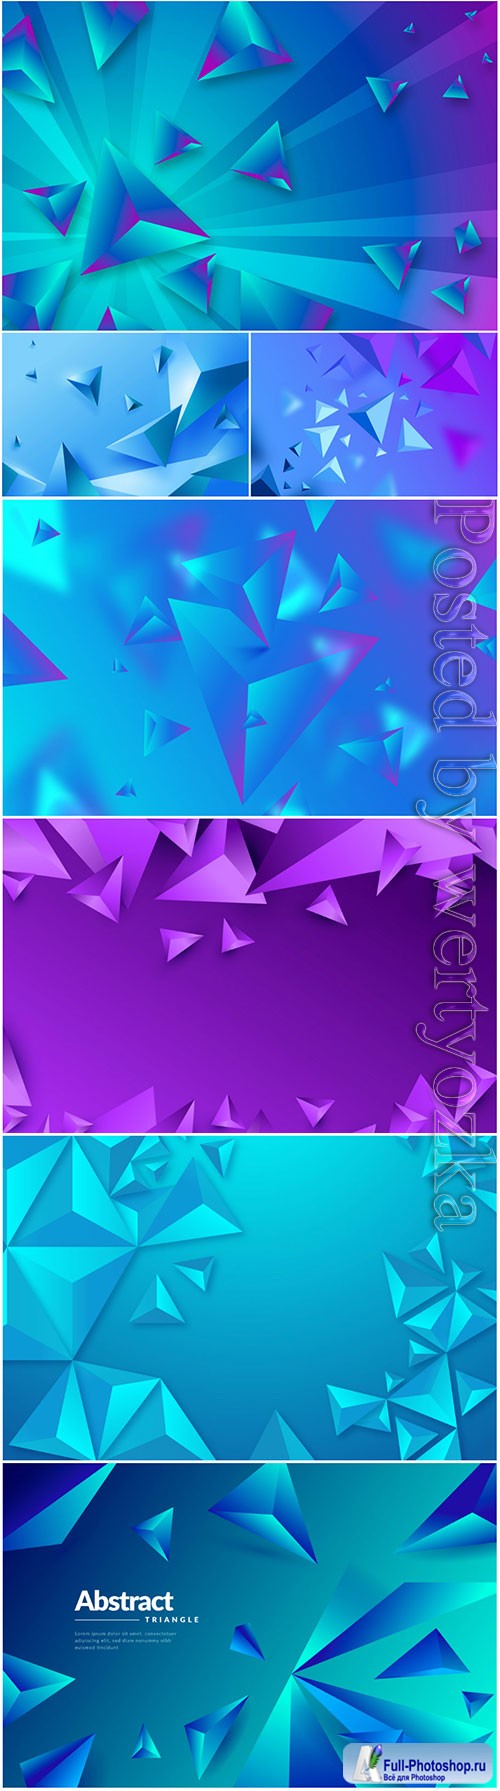 3d vector background with blue and lilac abstract elements